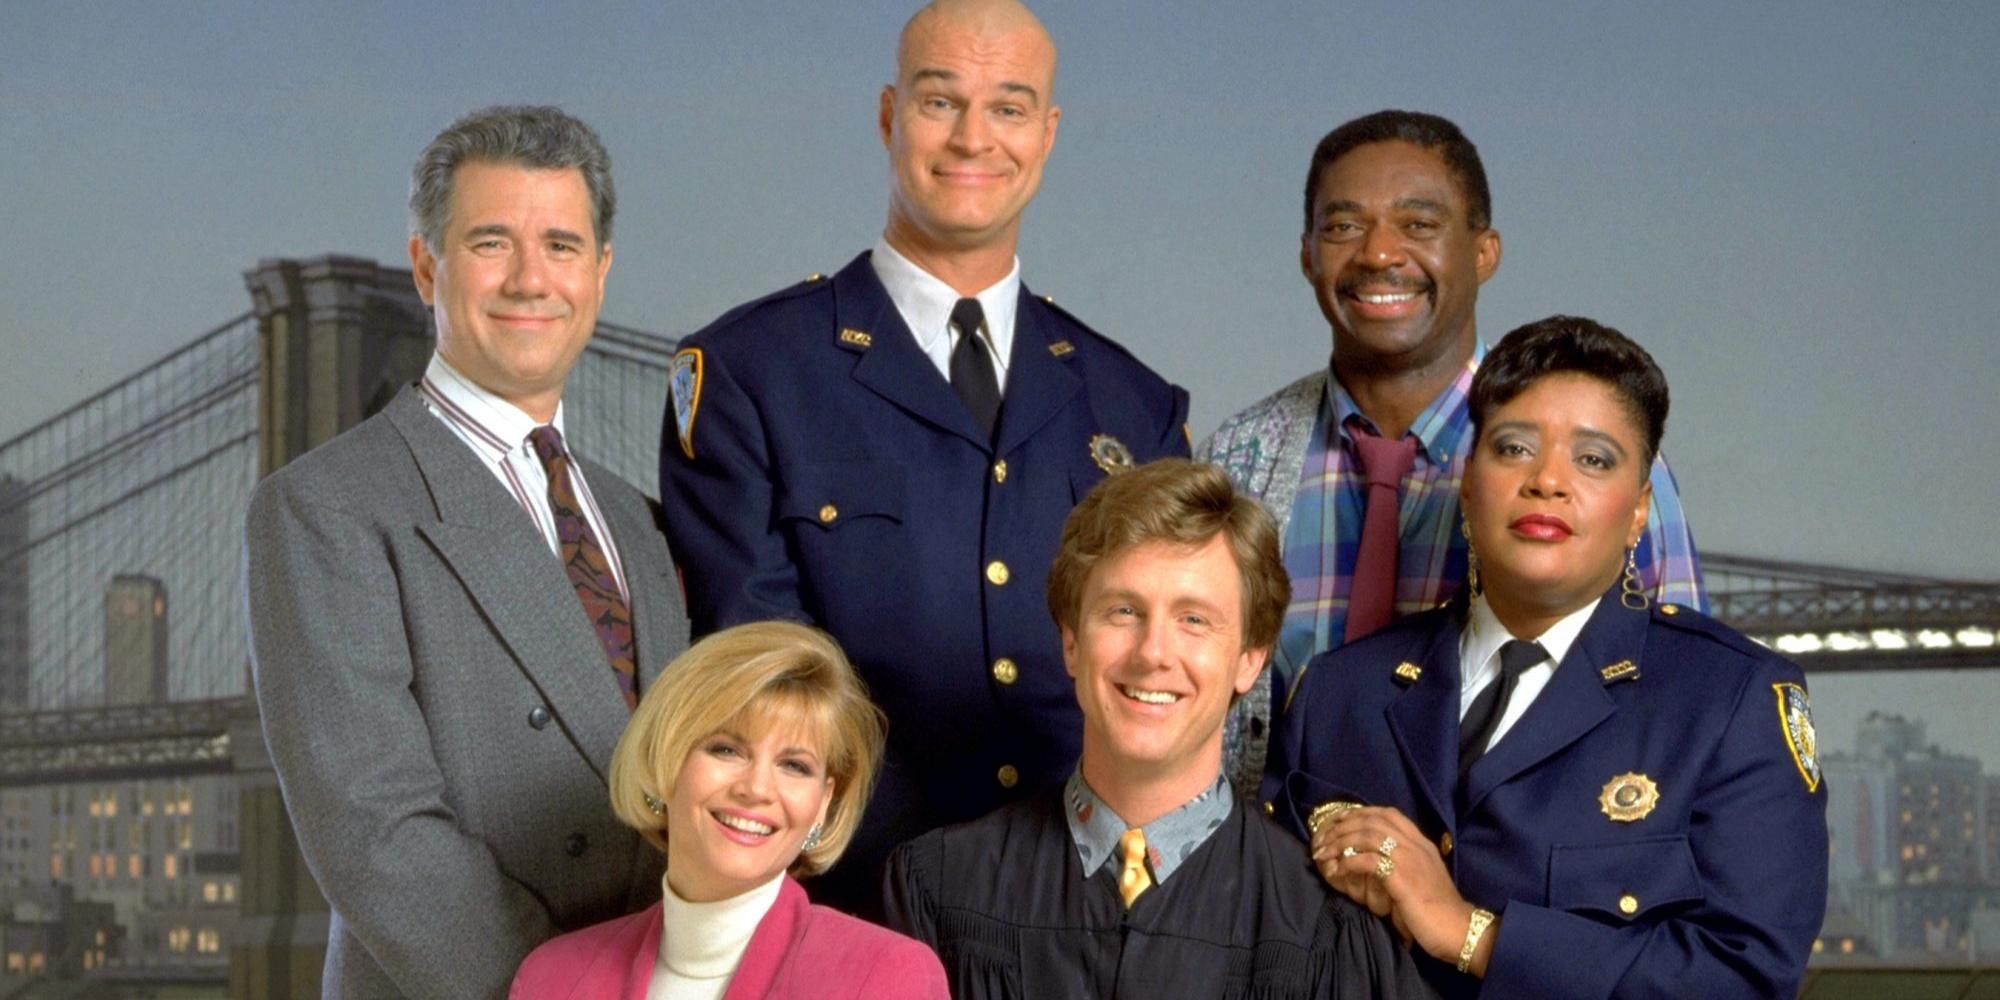 How Why The Night Court Revival Will Be Different From The Original